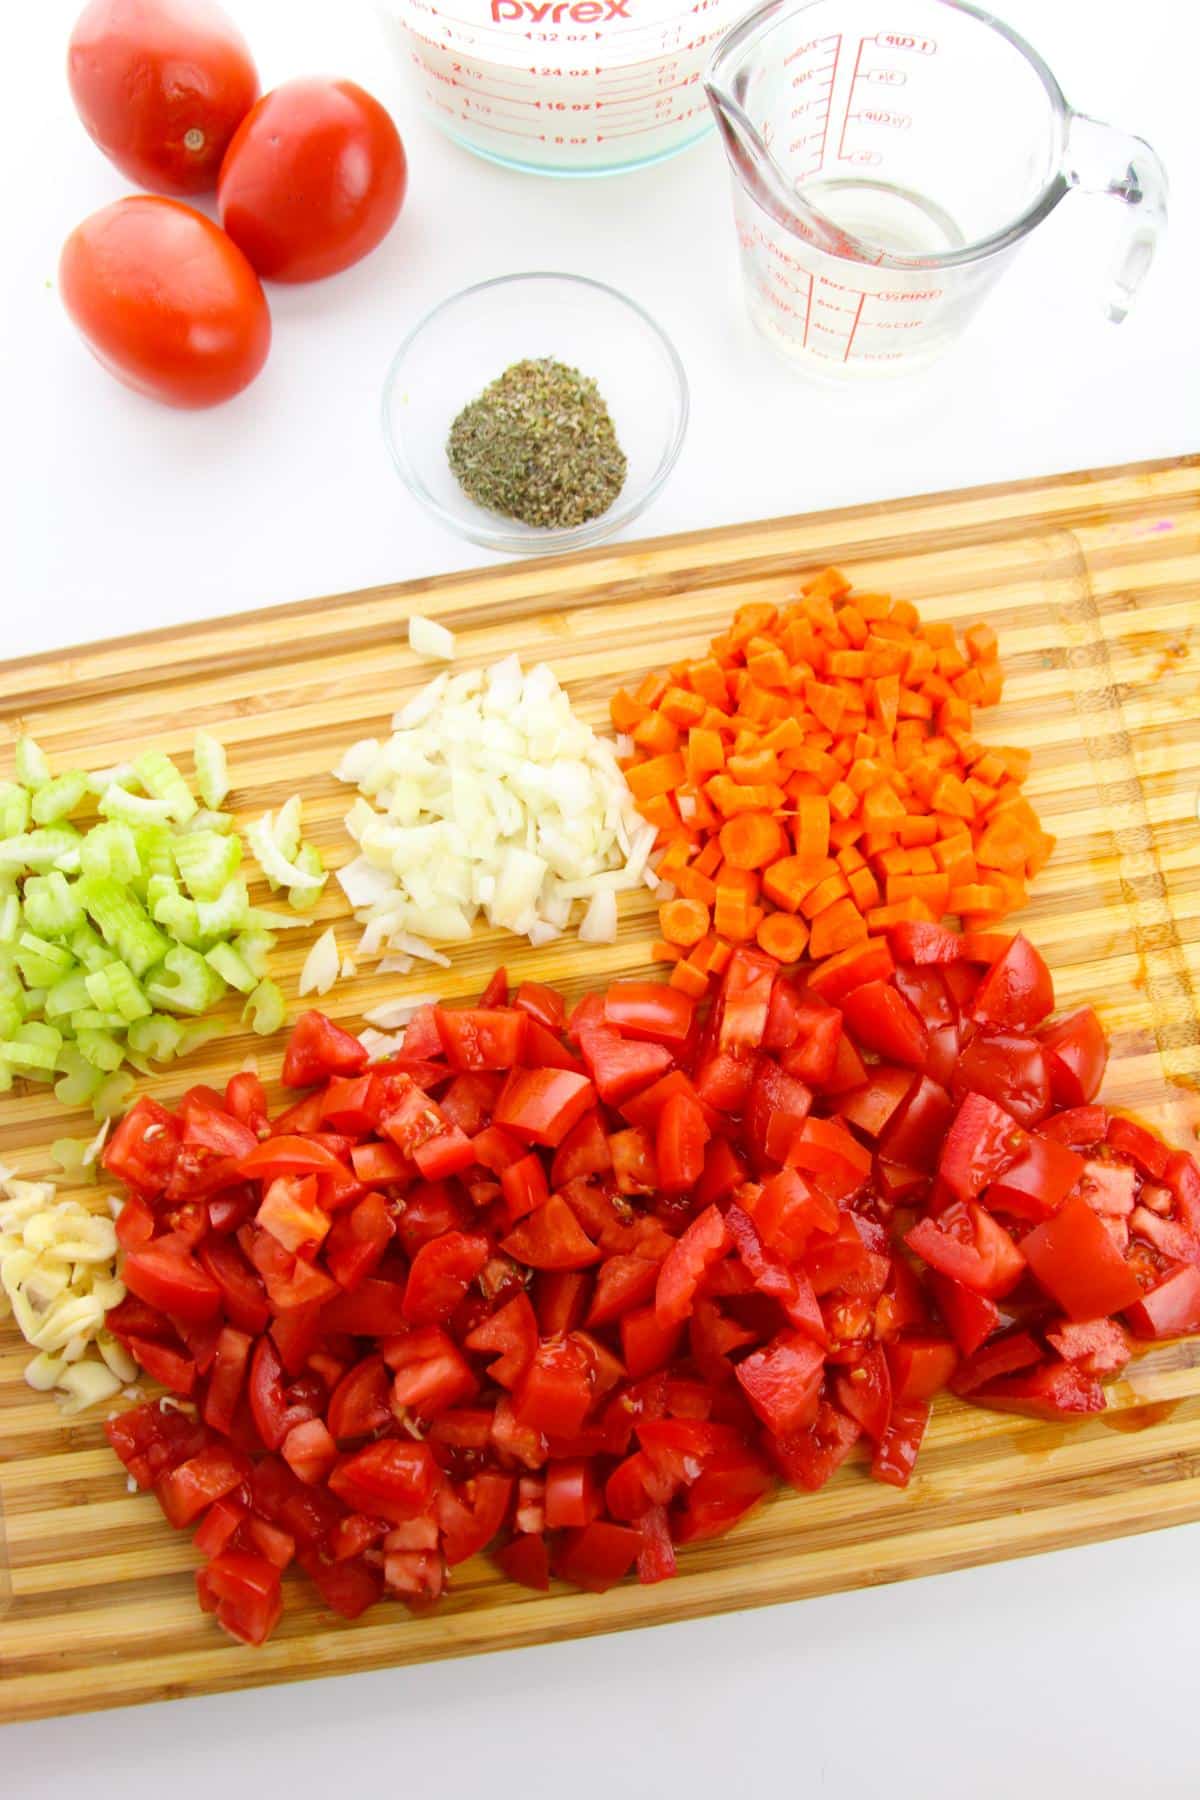 A cutting board with freshly chopped tomatoes, onions, celery, carrots and garlic.